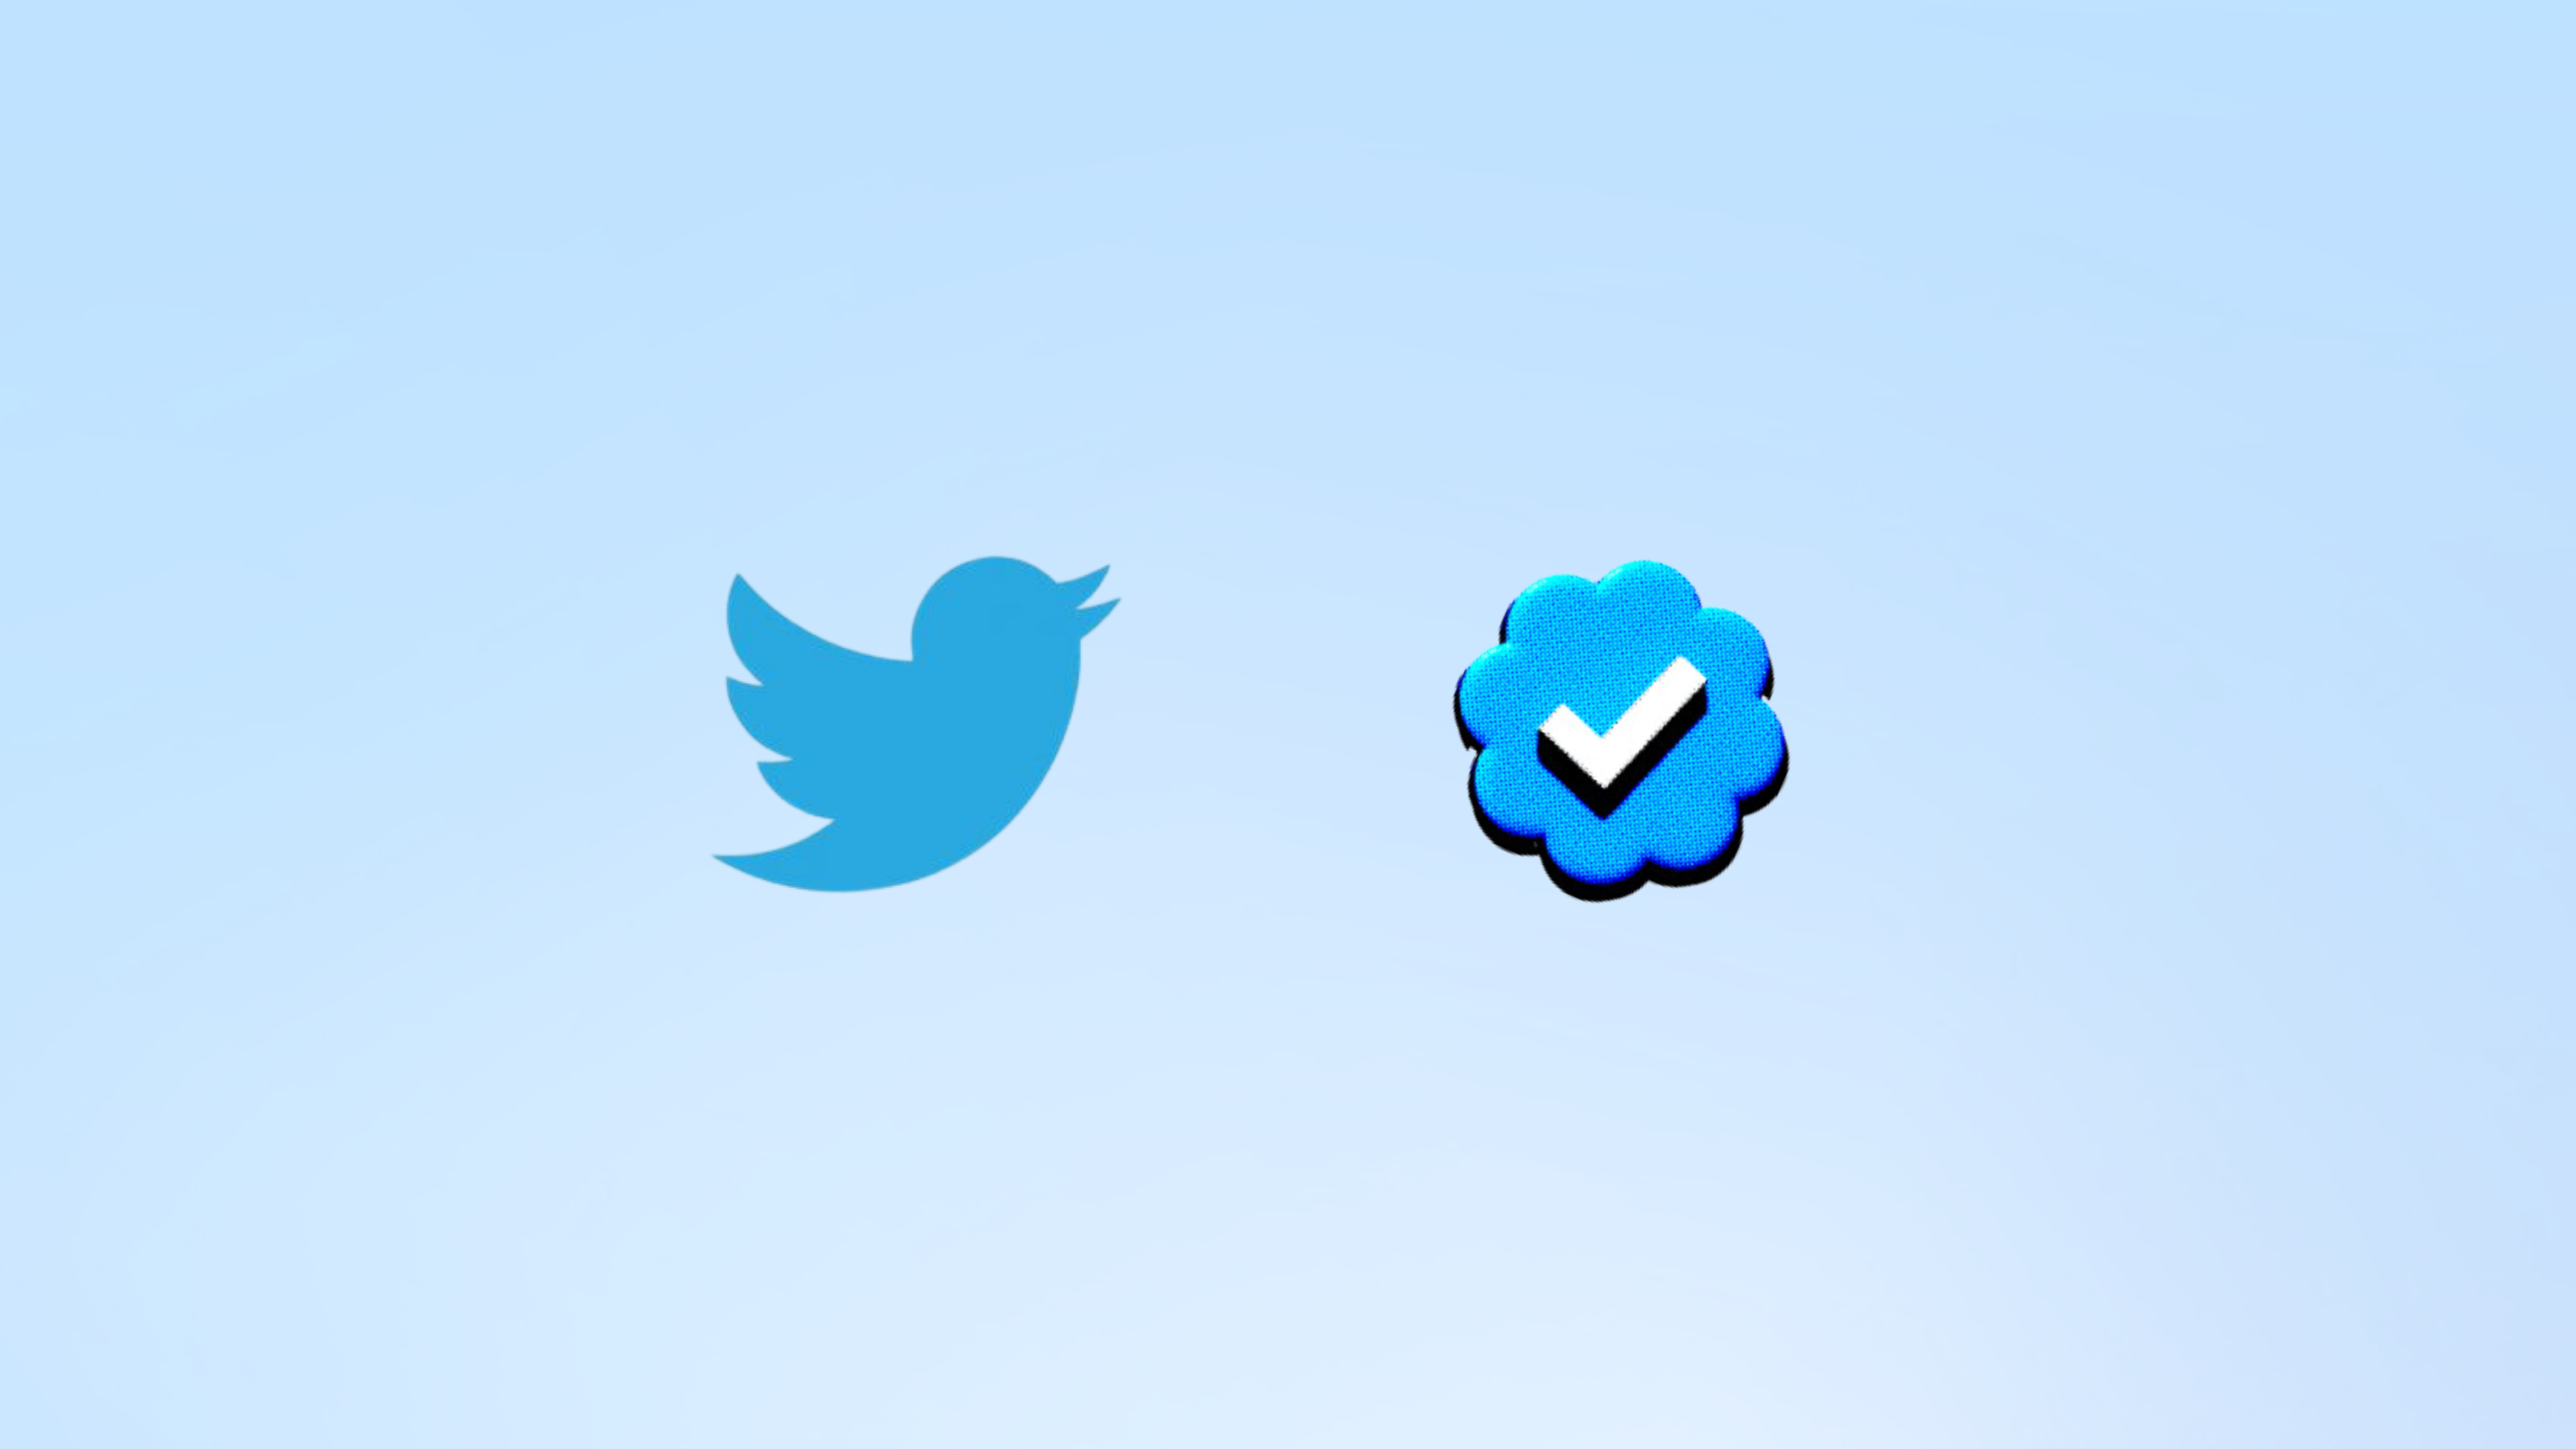 Twitter and blue logo on a gradient background